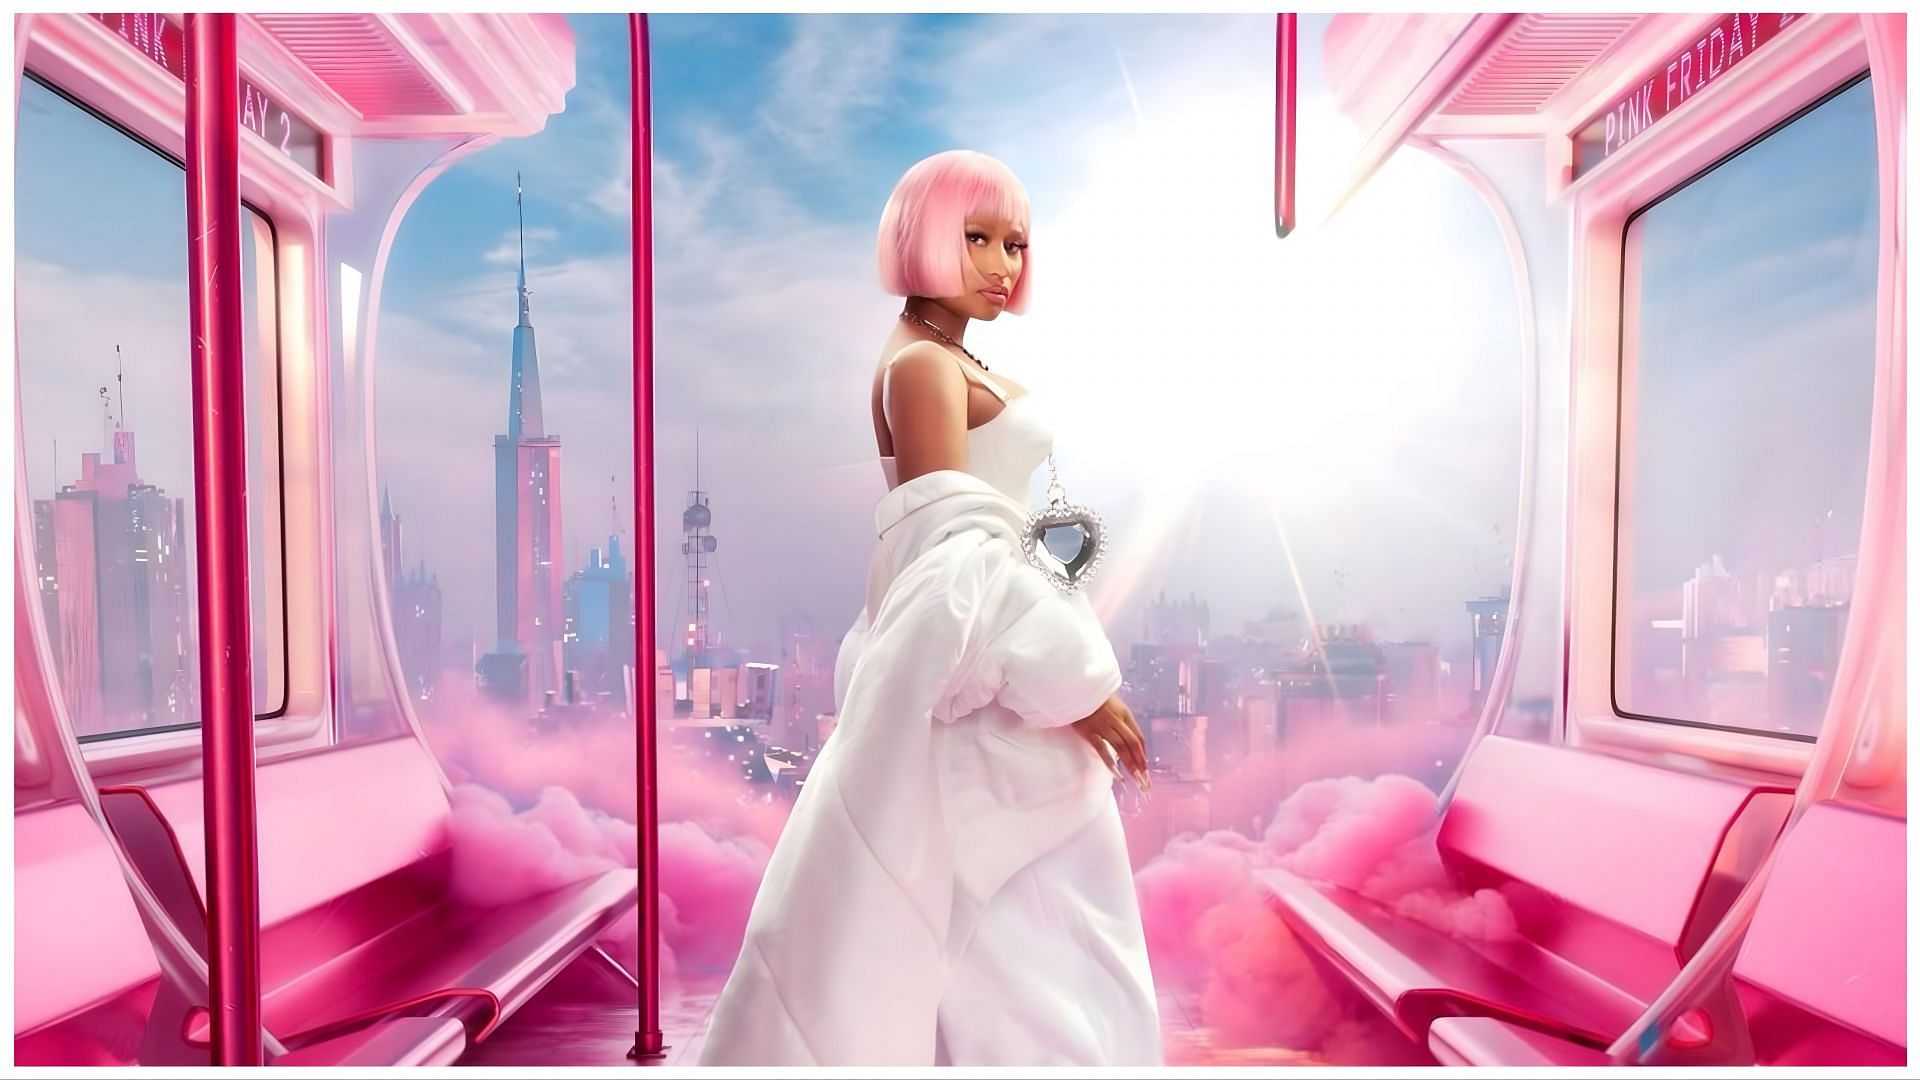 Nicki Minaj Pink Friday 2 World Tour Presale Code Tickets Prices Dates Venues And All You